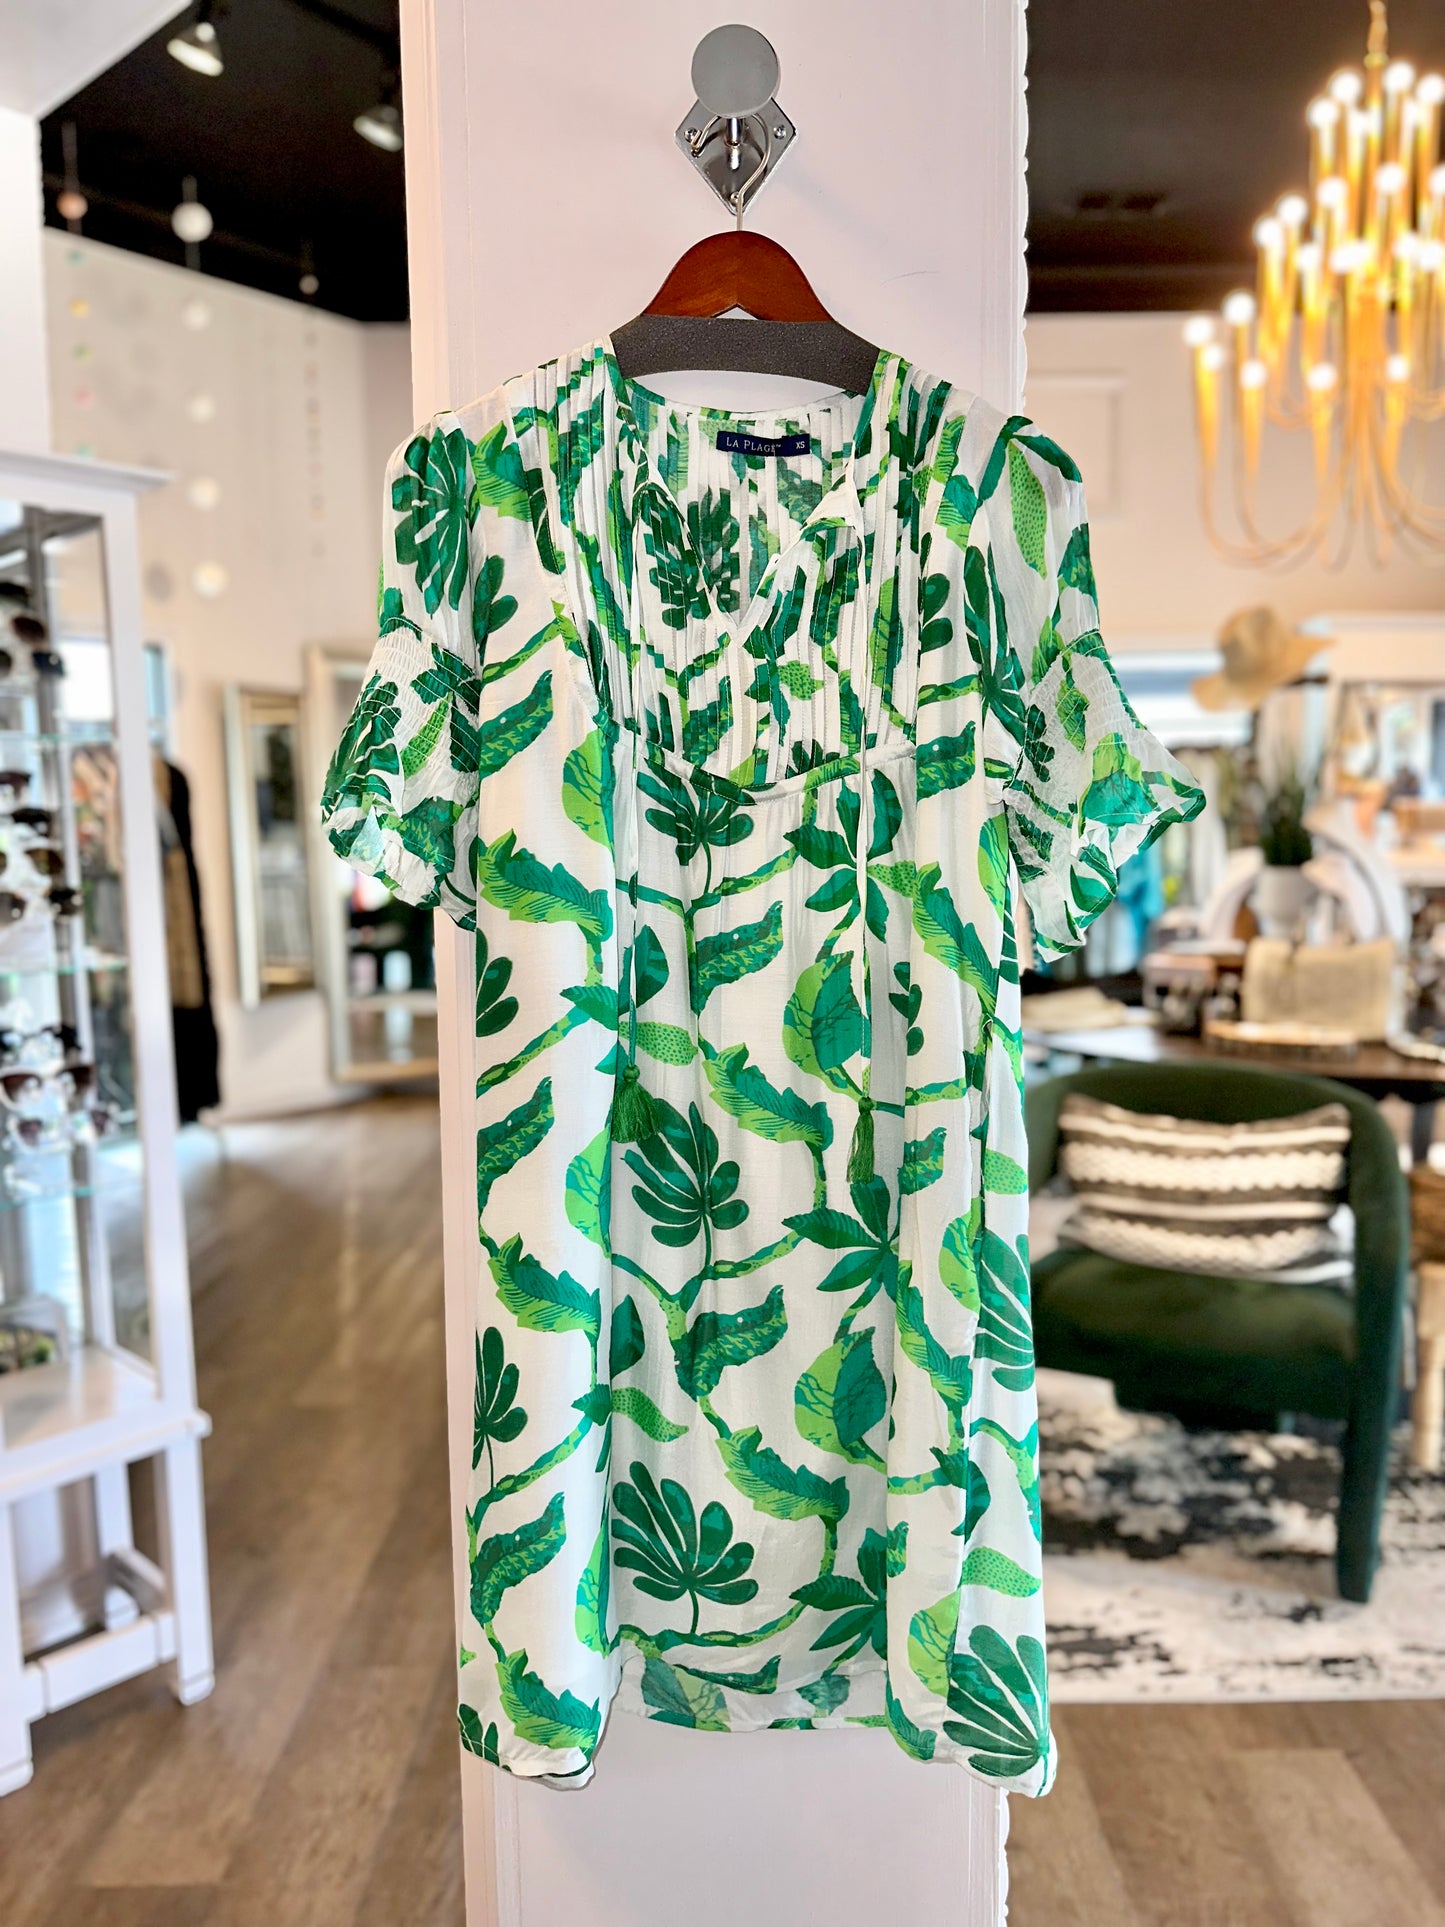 Celerie Jungle Vines Dress in white/turquoise/greens by LA Plage